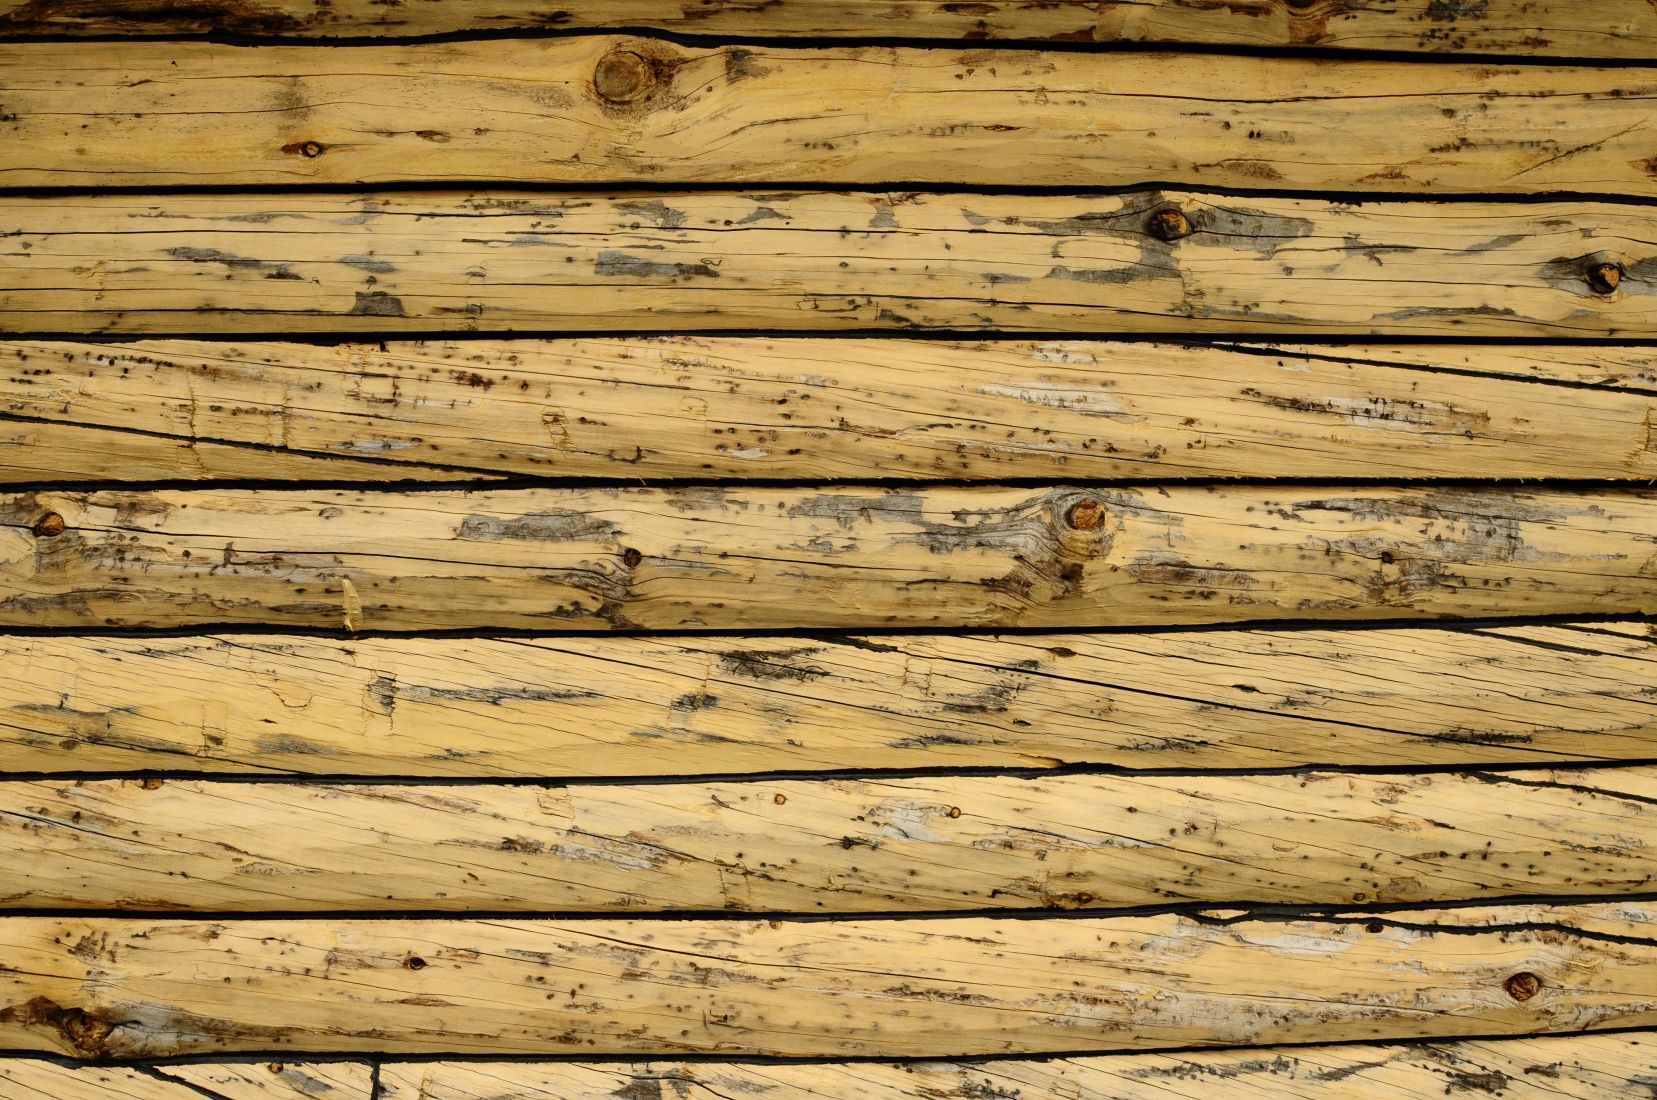 Close View of the Rustic Log Wall